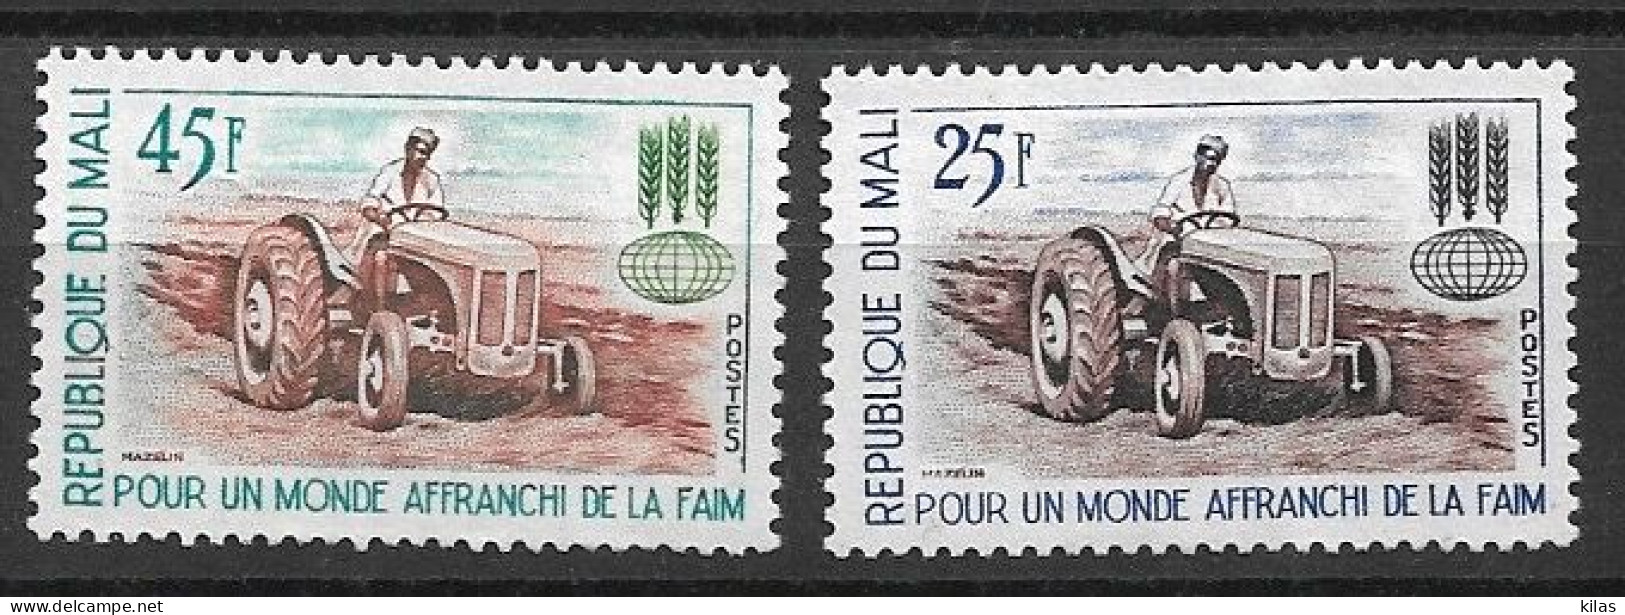 MALI 1963 FREEDOM FROM HUNGER MNH - Alimentation